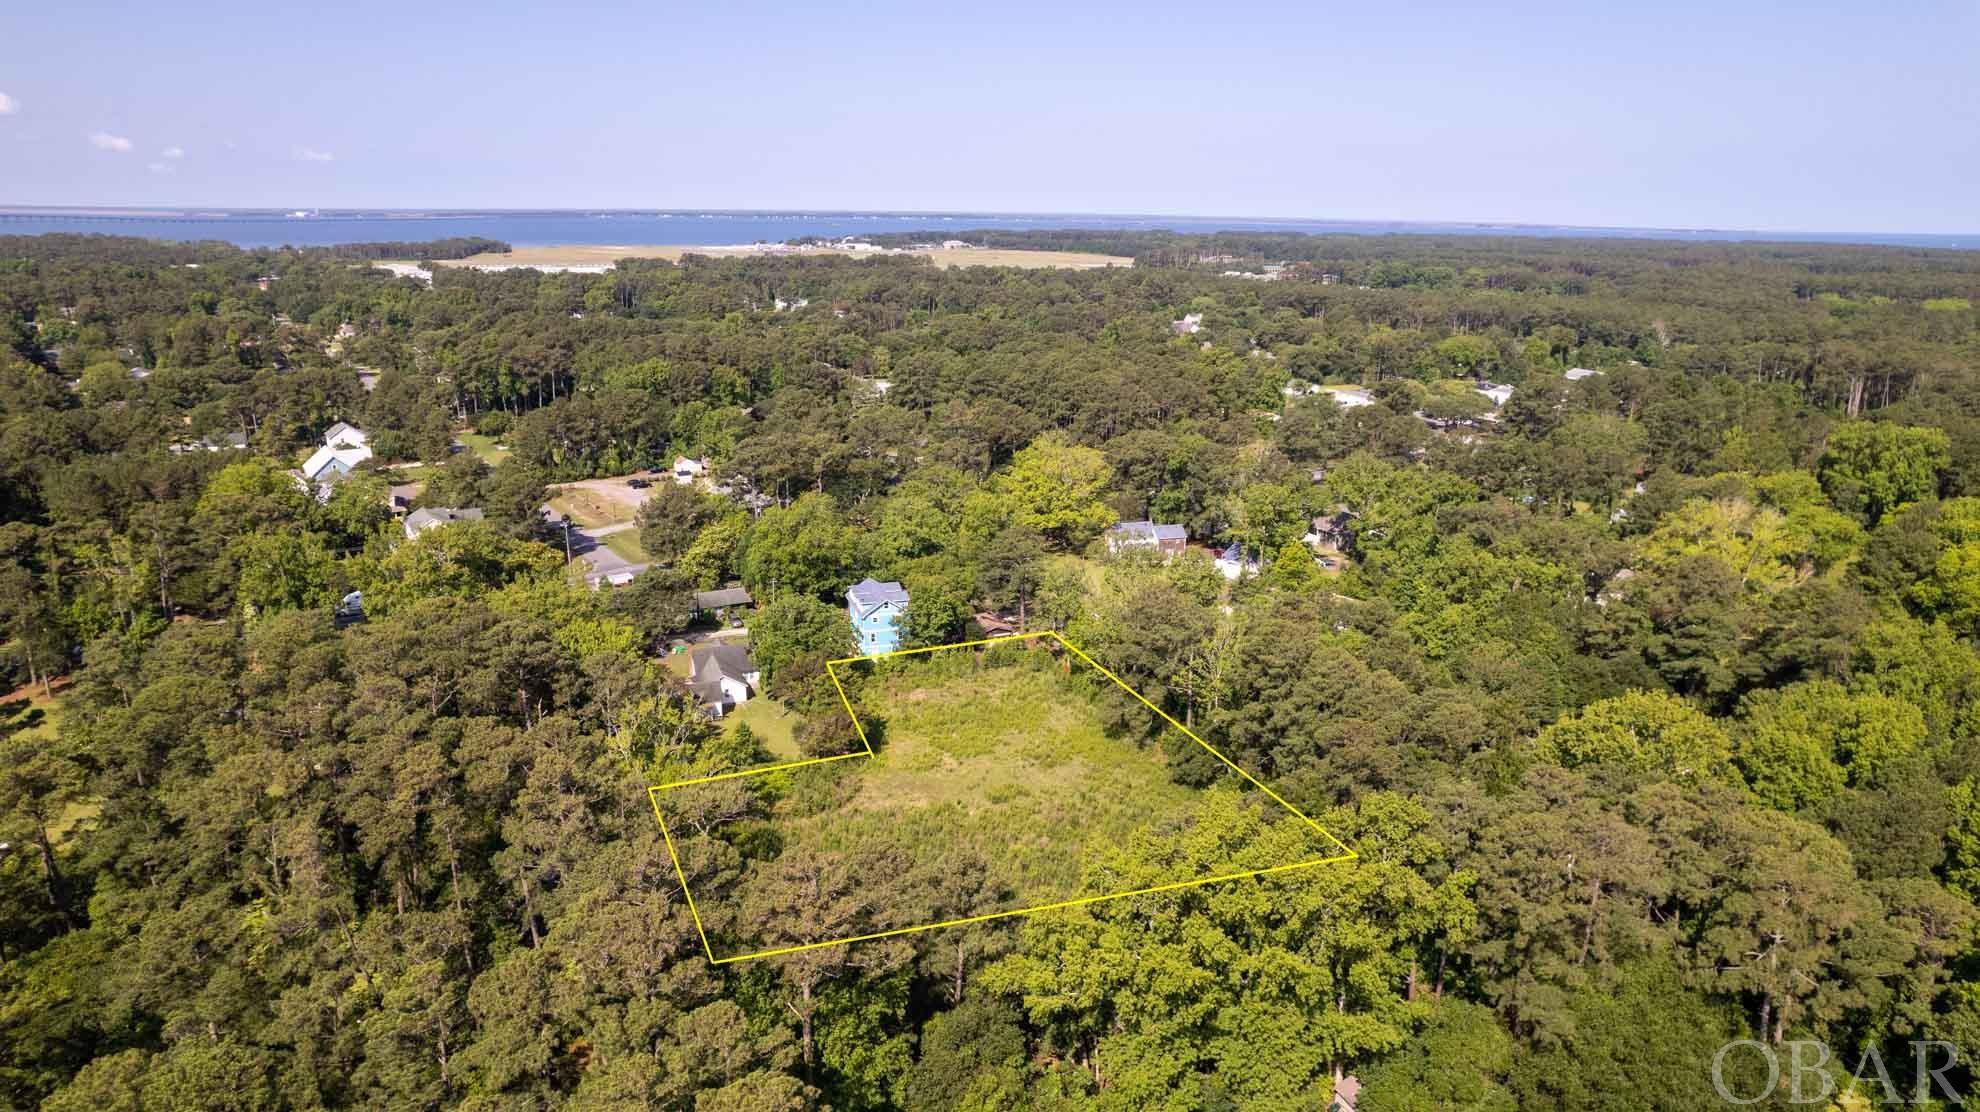 108 Rogers Road, Manteo, NC 27954, ,Lots/land,For sale,Rogers Road,125184